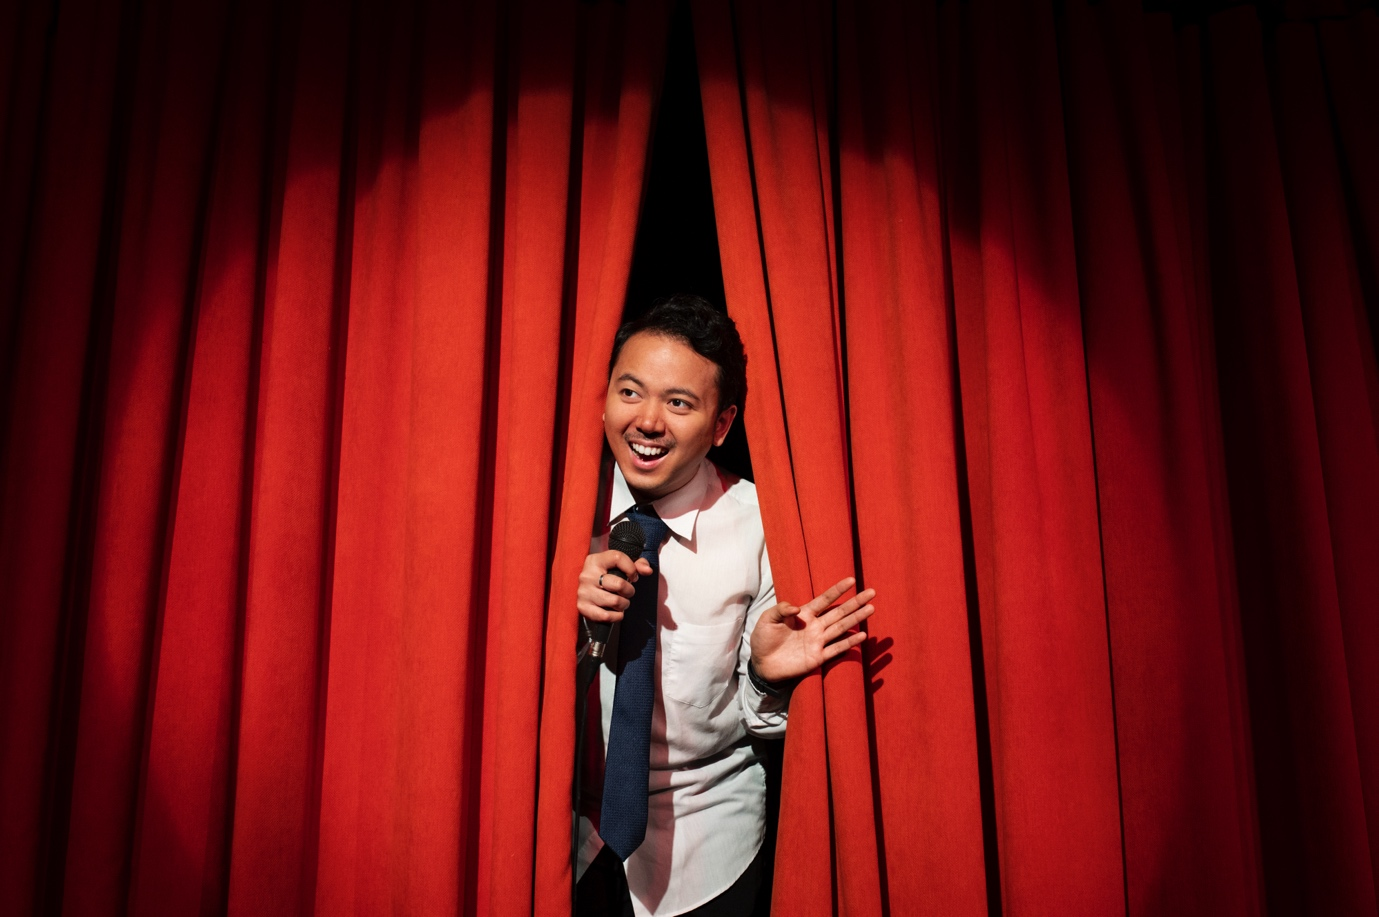 A stand-up comedian peers through a red curtain, about to go onstage.